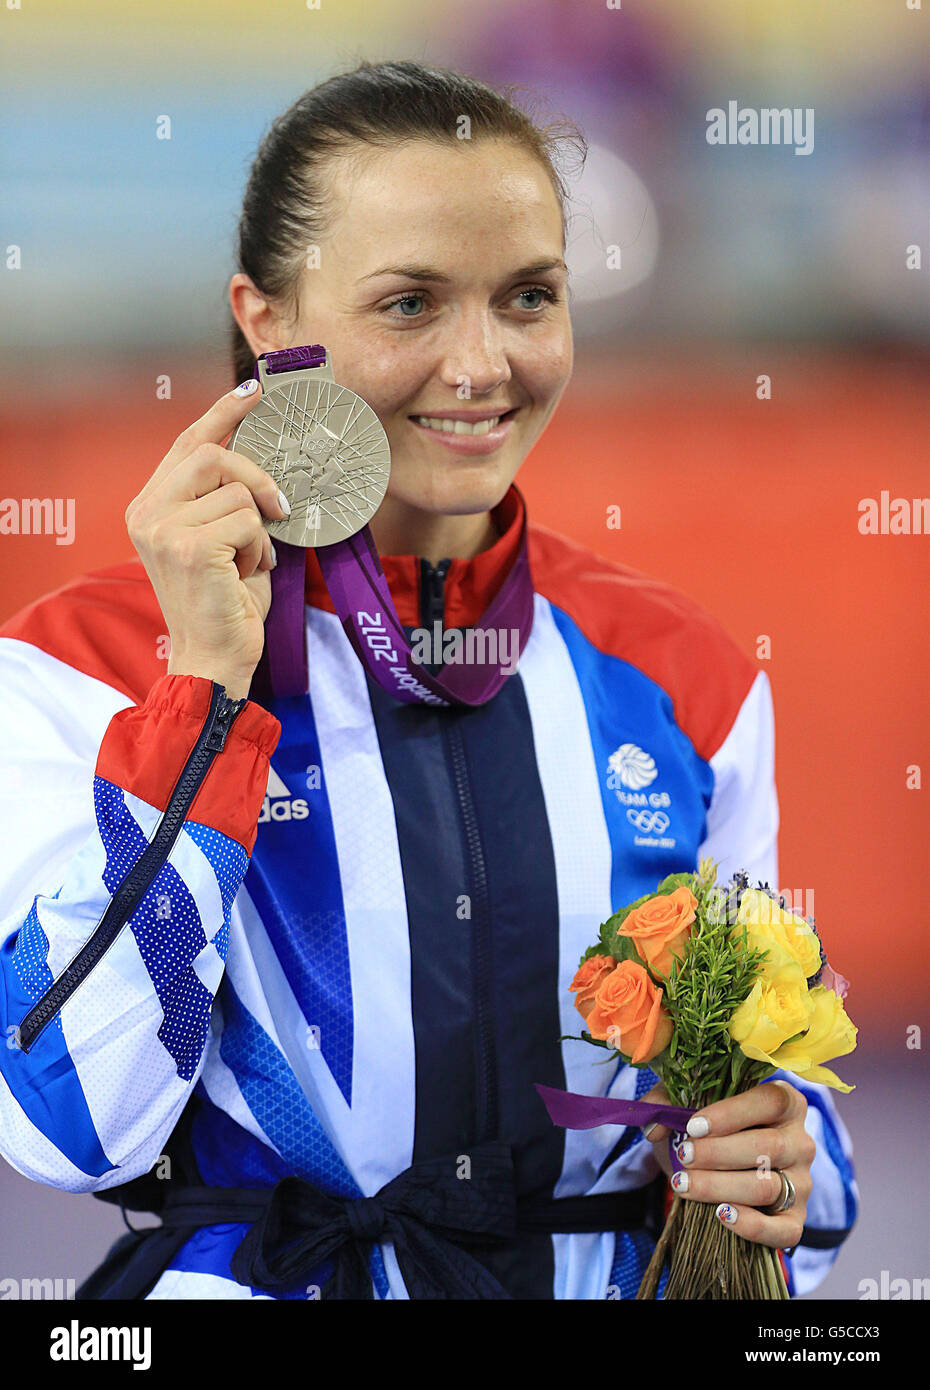 Great Britain's Victoria Pendleton celebrates with her Silver Medal after winning silver in the Women's Sprint in the Velodrome at the Olympic Park, on the eleventh day of the London 2012 Olympics. Stock Photo